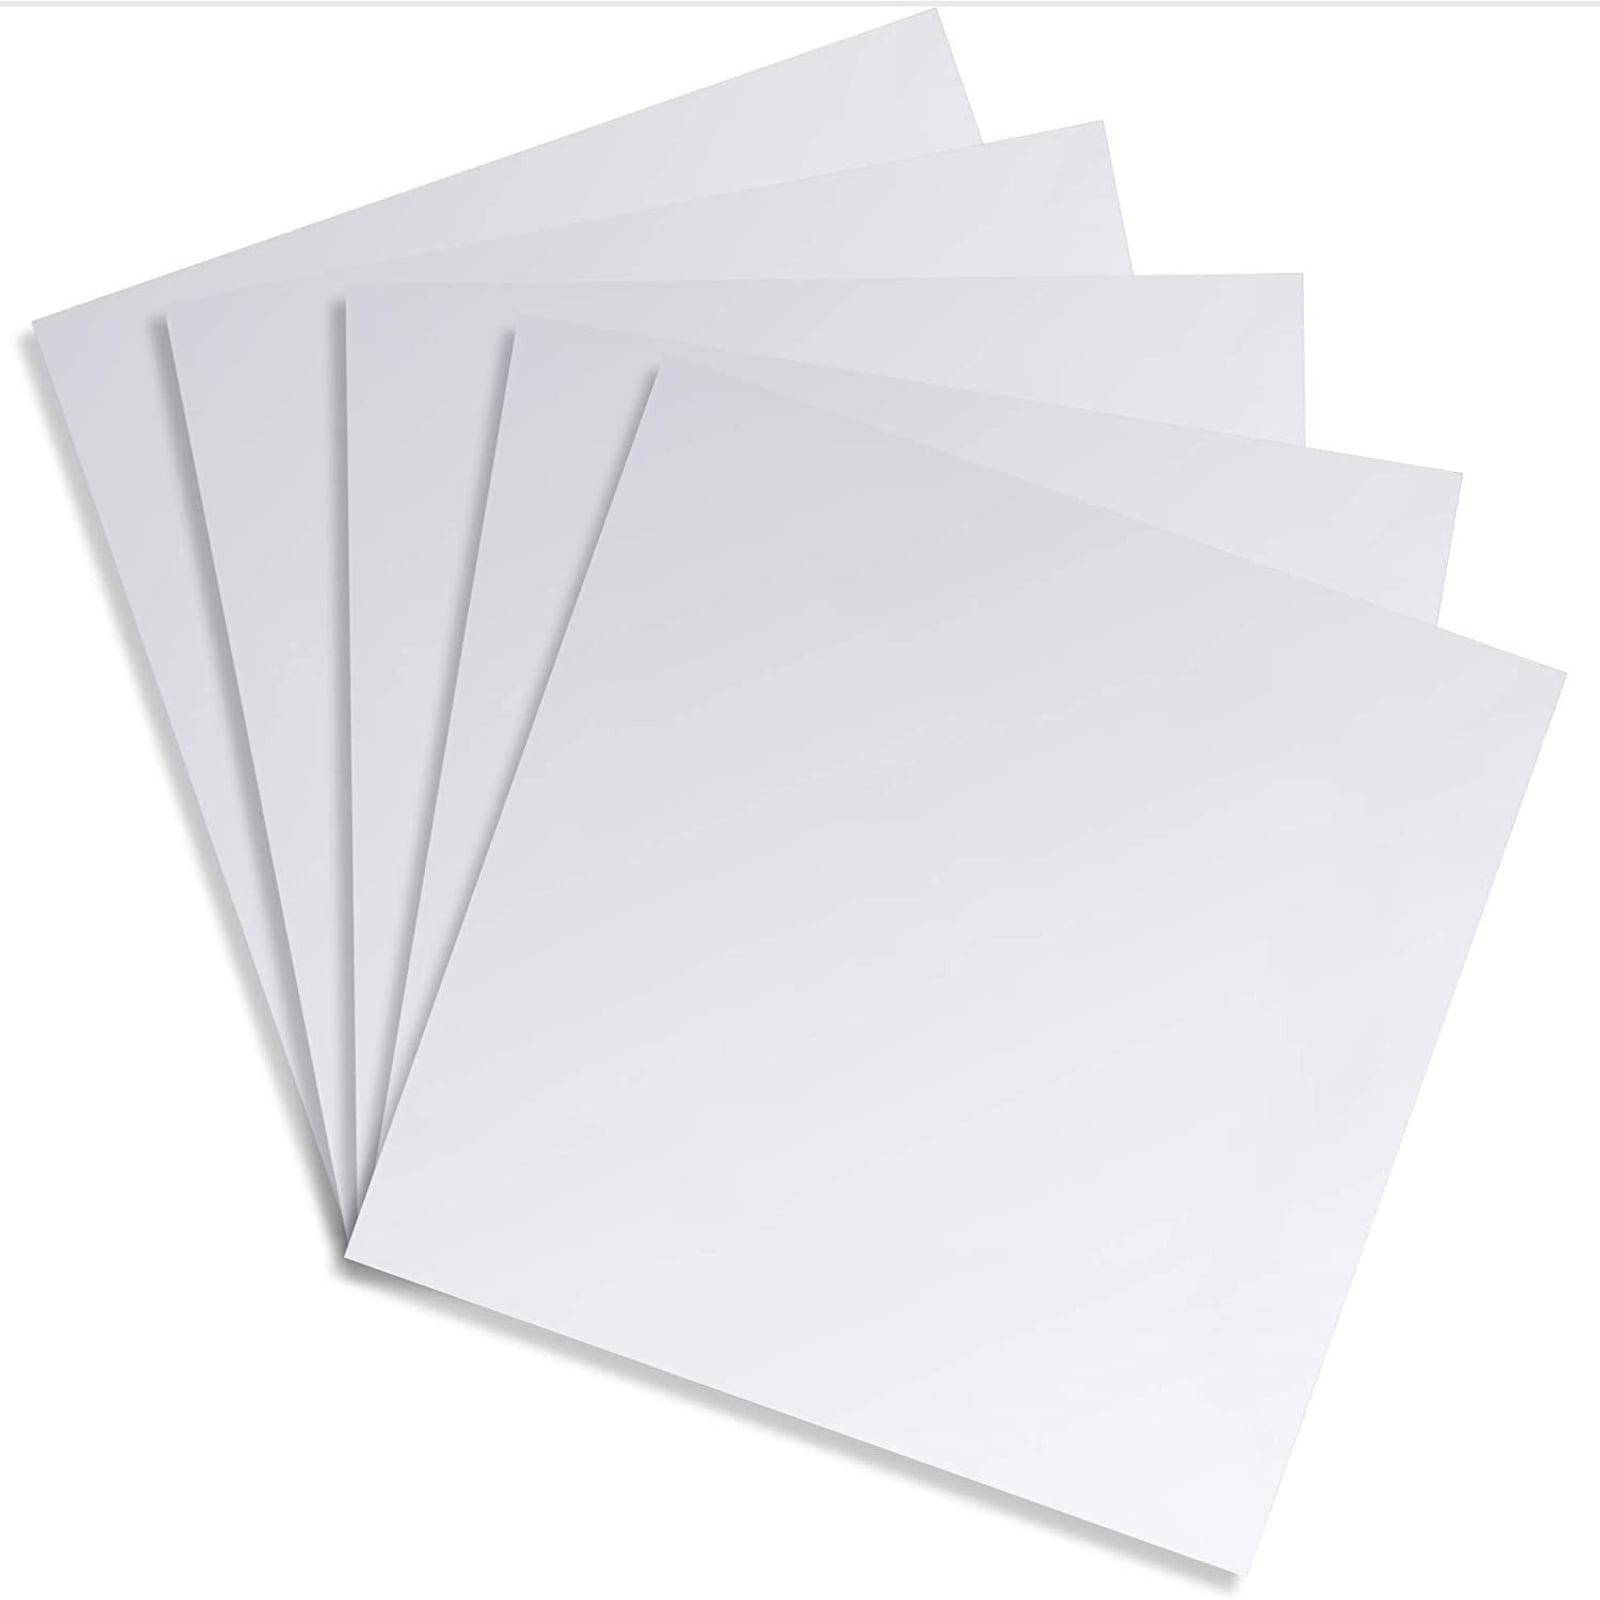 Set of 5 x A4 Sheets x Coloured Chrome Mirrored Self Adhesive Sign Vinyl  Crafts 